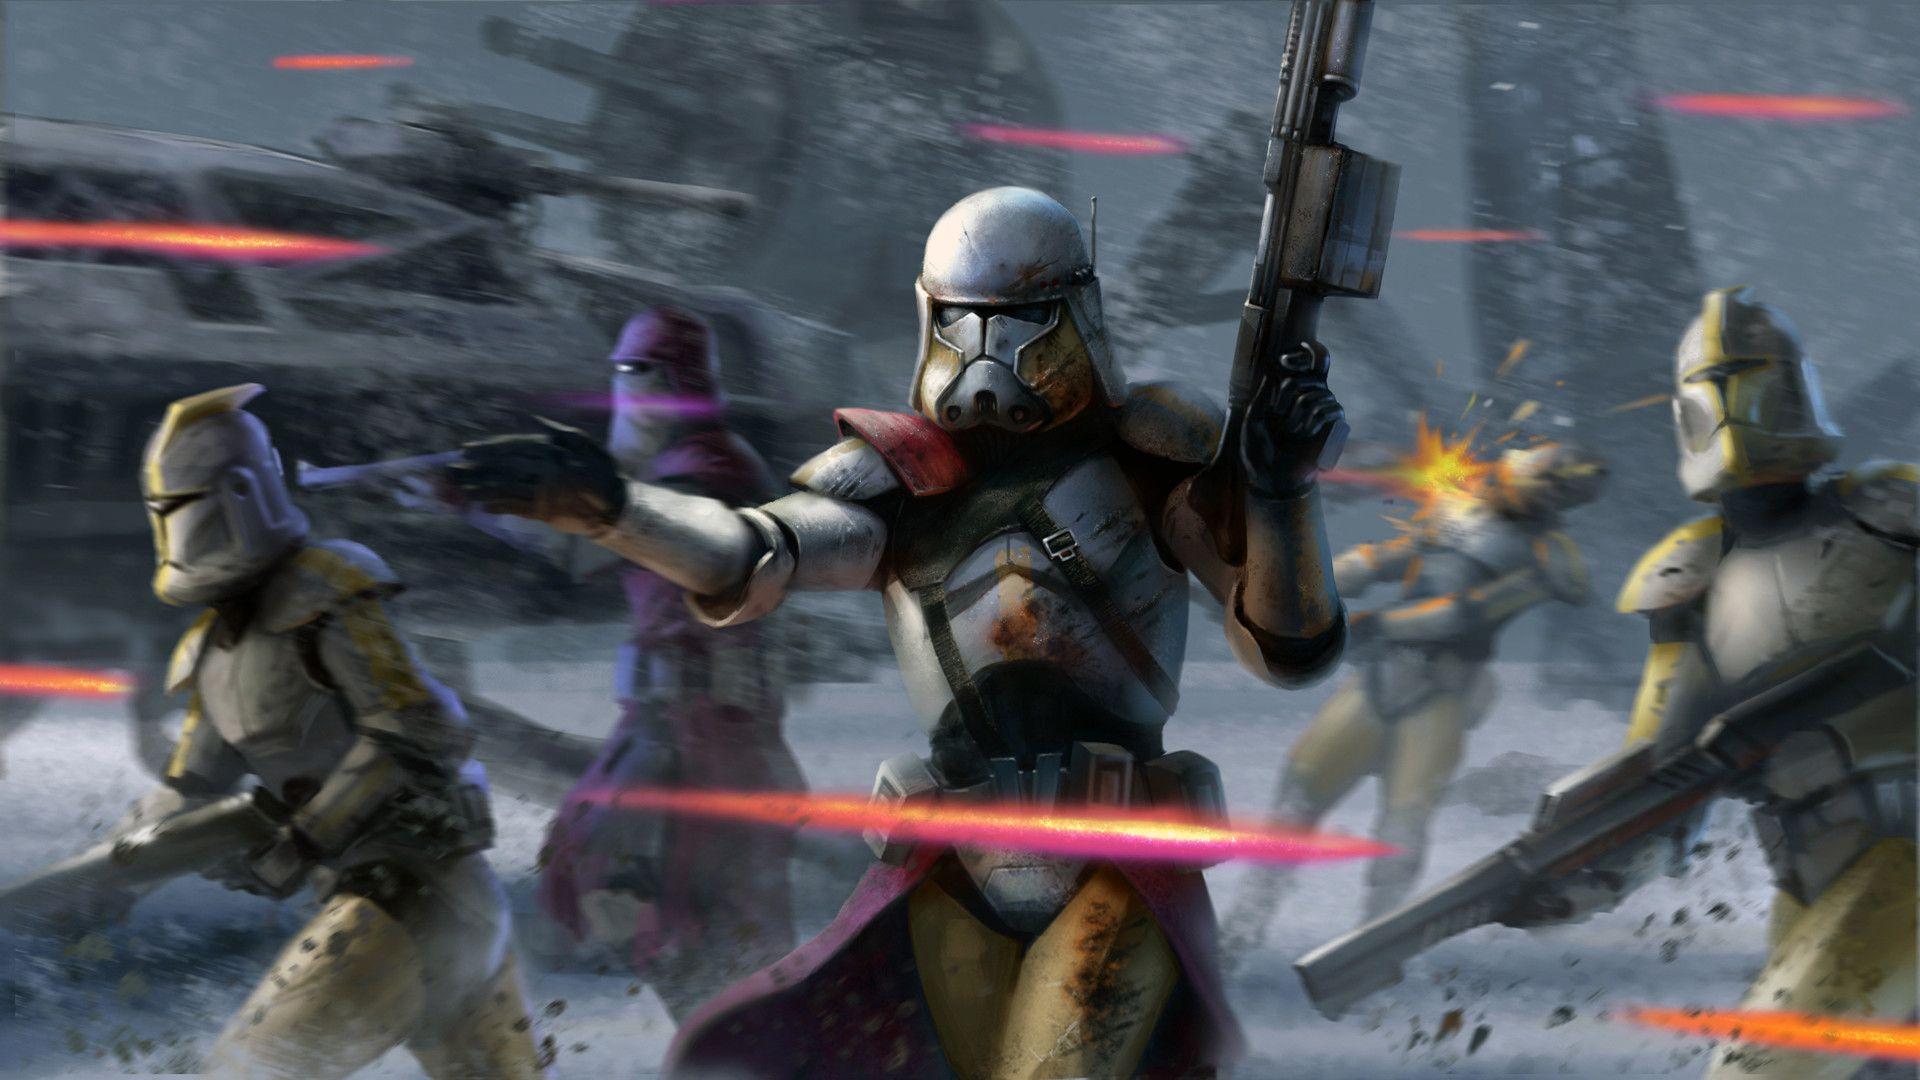 Clone Wars Wallpaper Star The For Mobile HD Pics